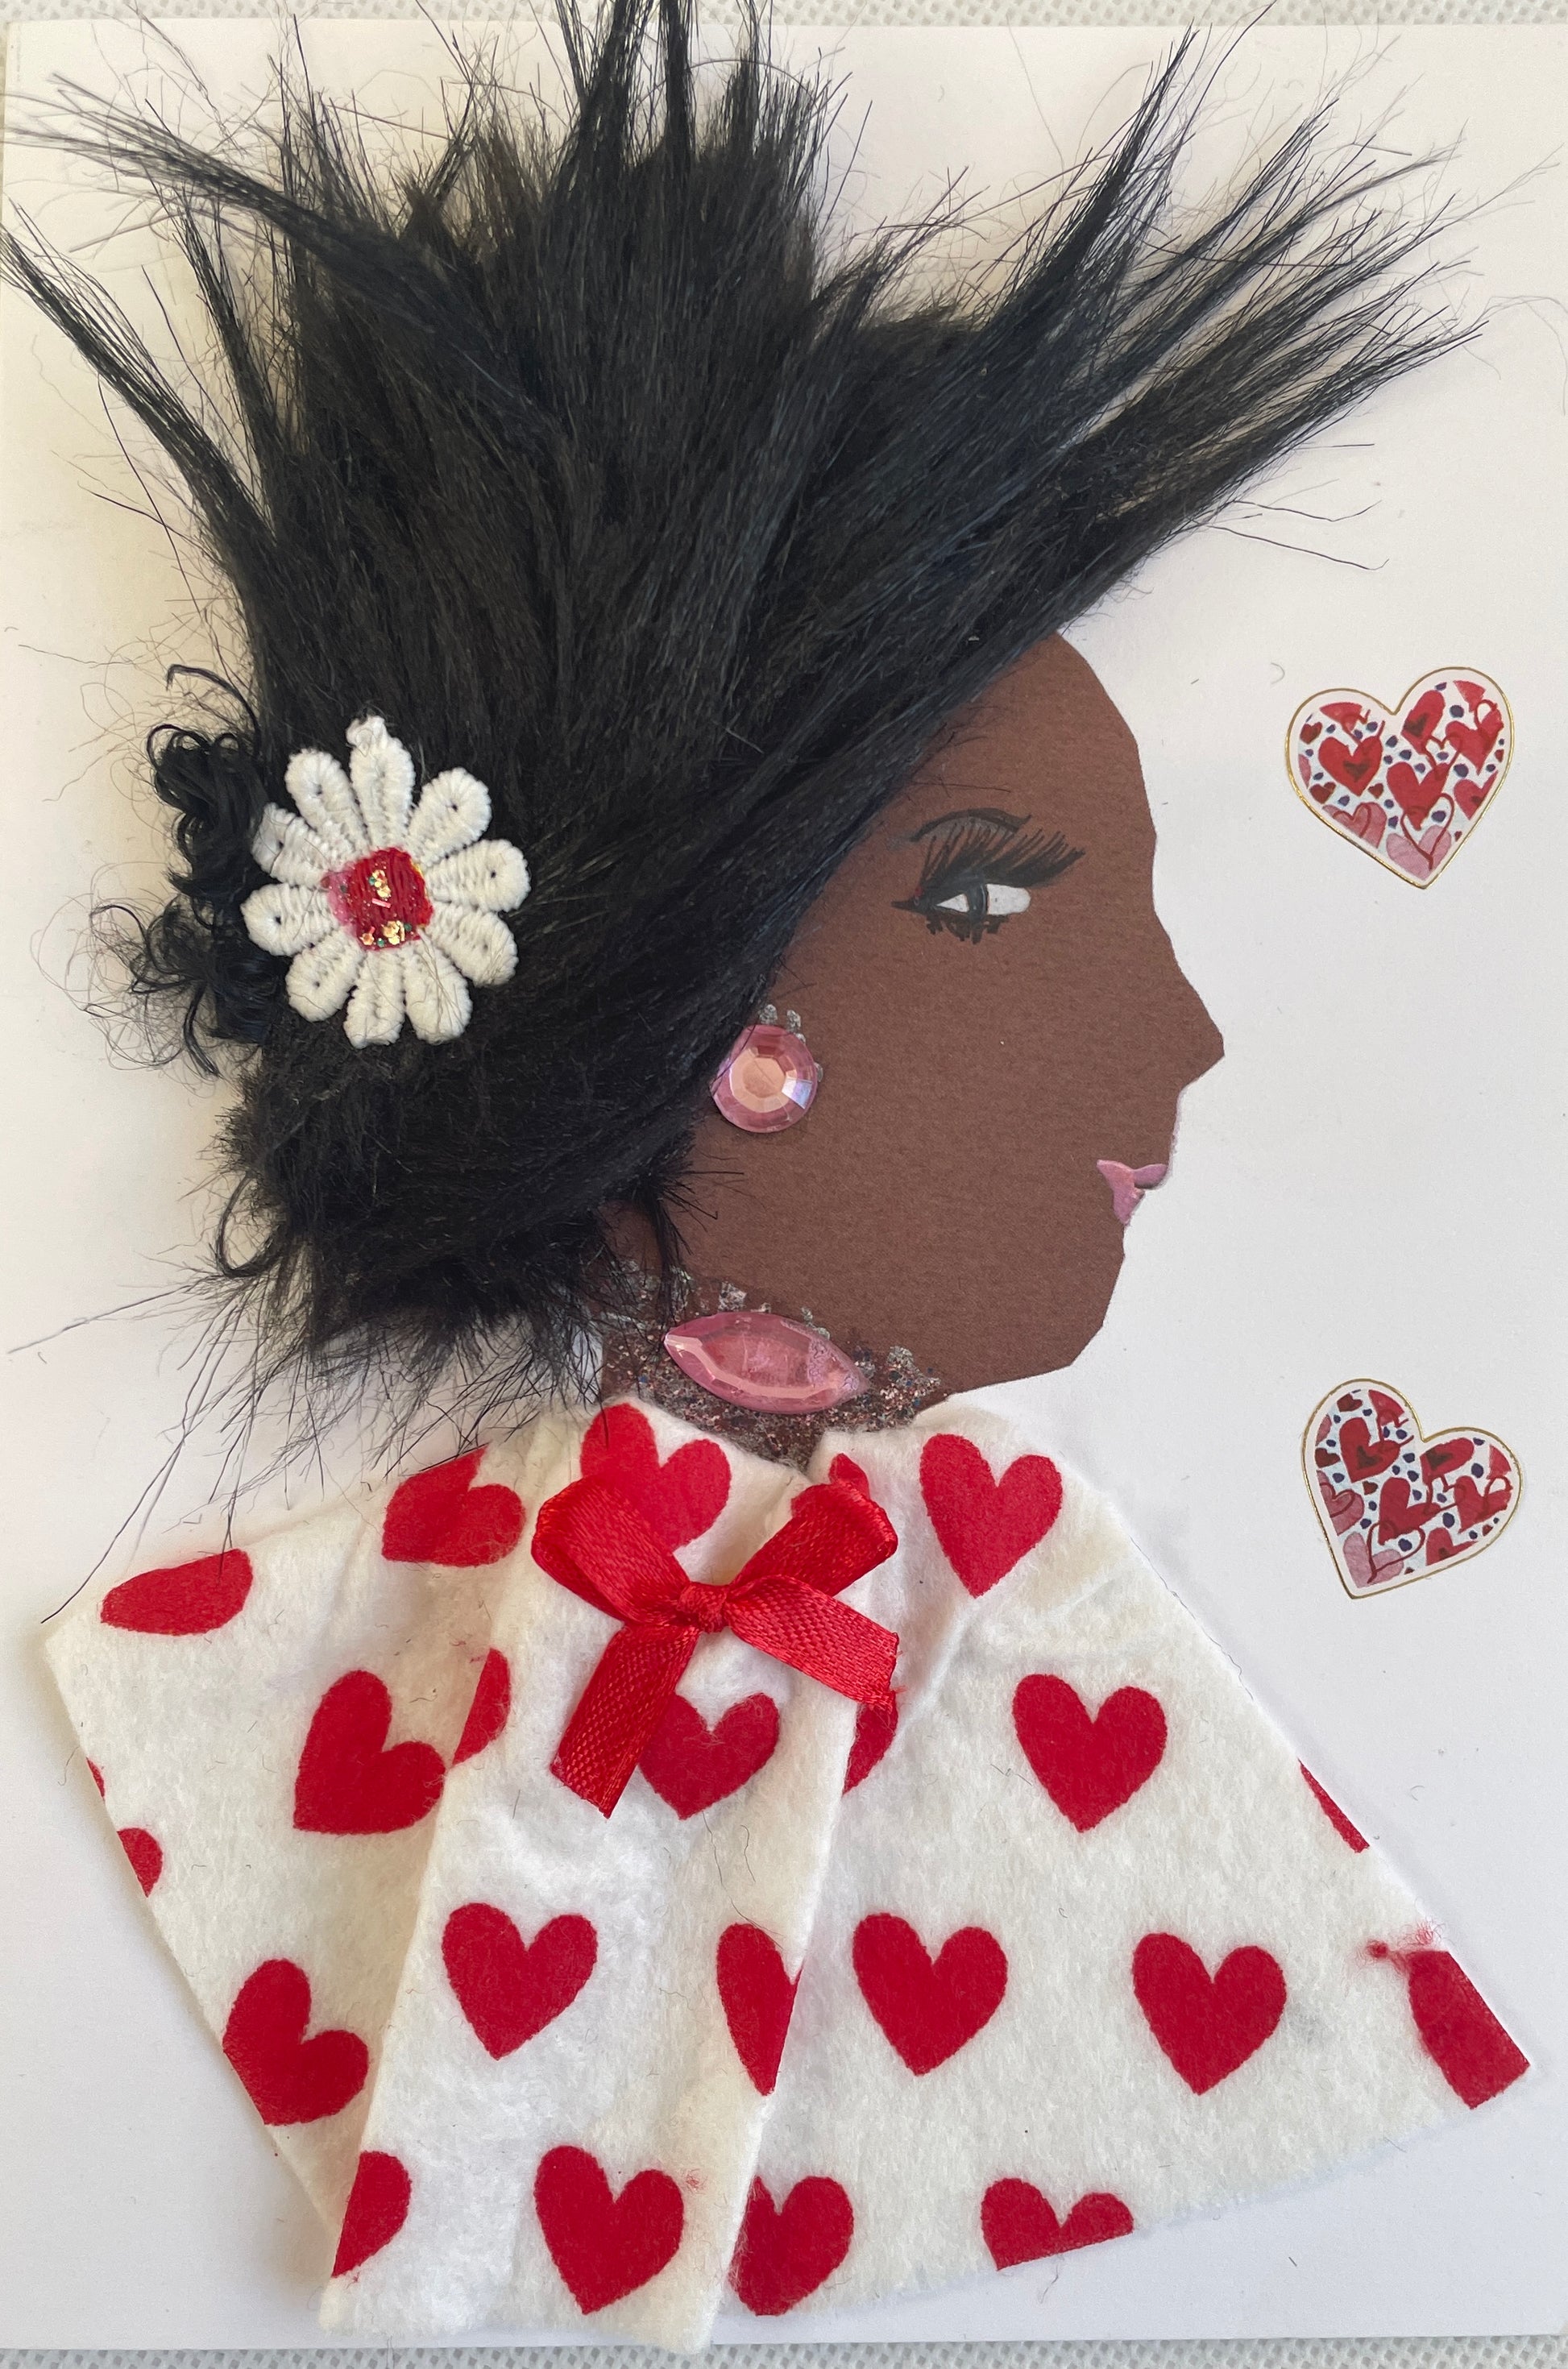 This  picture has a black  woman I have called Elizabeth wearing  a blouse decorated with red hearts and a matching red bow. There is a single flower in her spiky hair. She has precious pink jewellery on as well. There are two red hearts on her right side. 